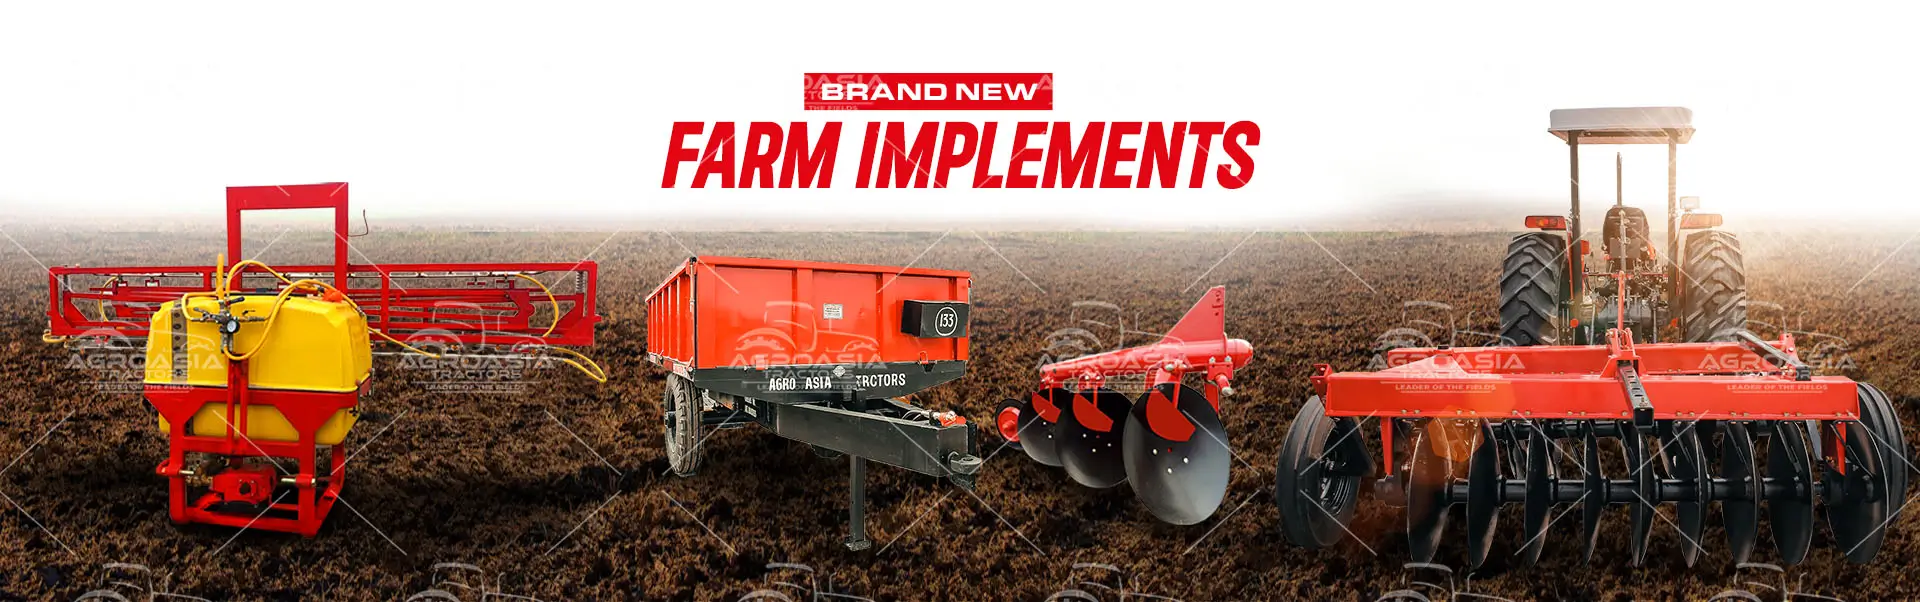 Brand New Farm Implements